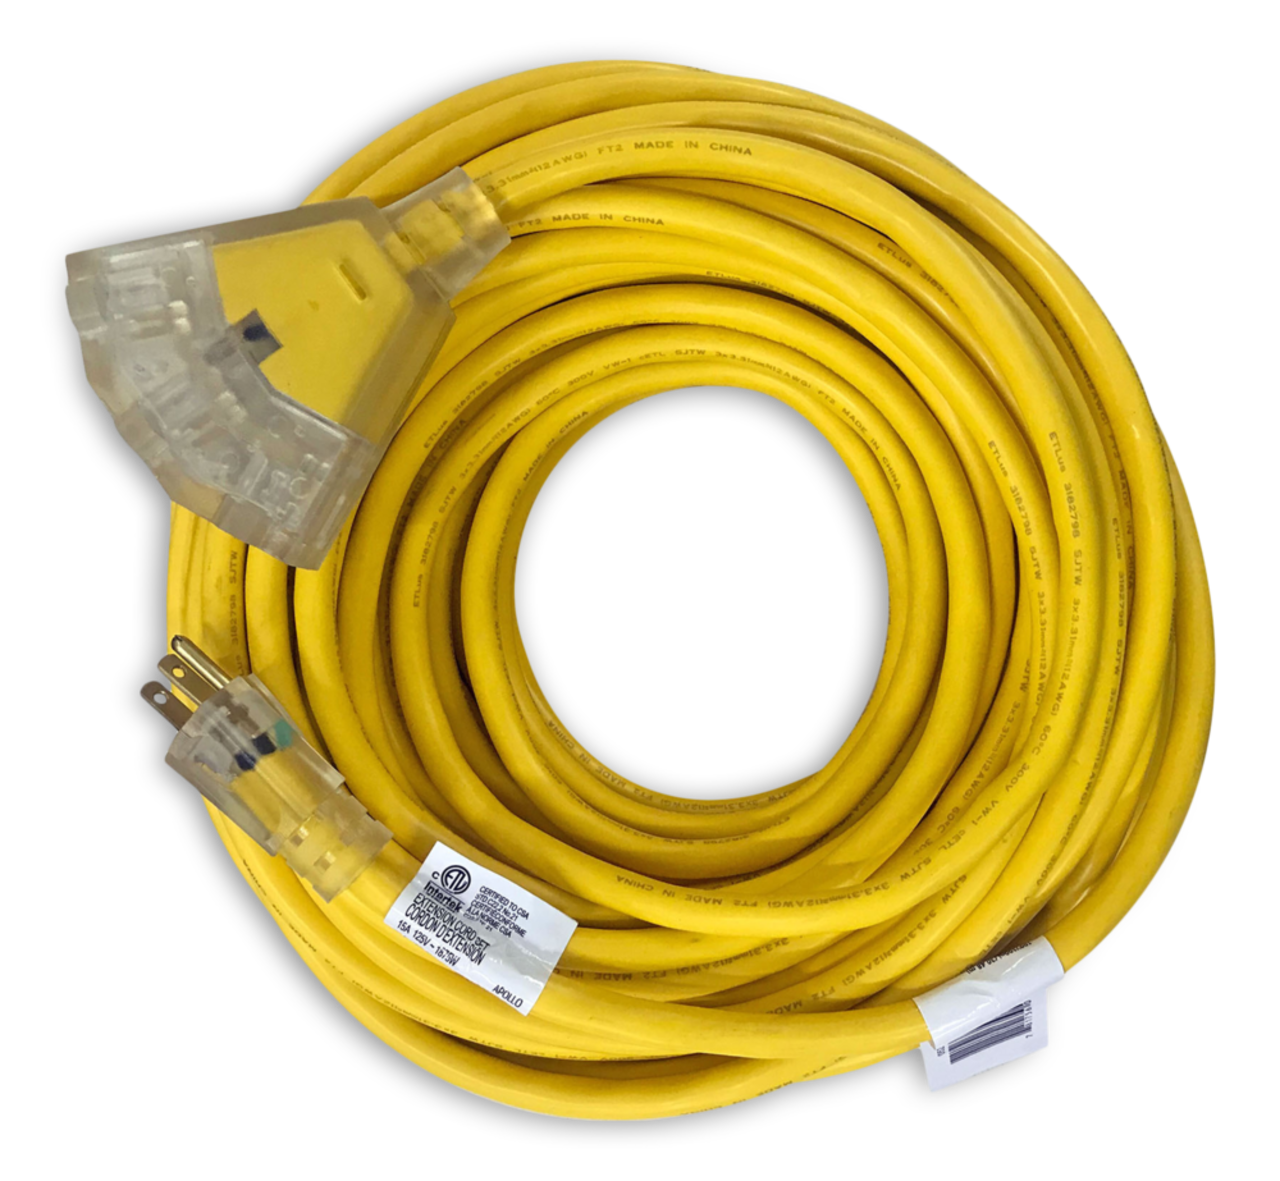 Project Source 50-ft 16 / 3-Prong Outdoor Sjtw Light Duty General Extension  Cord in the Extension Cords department at